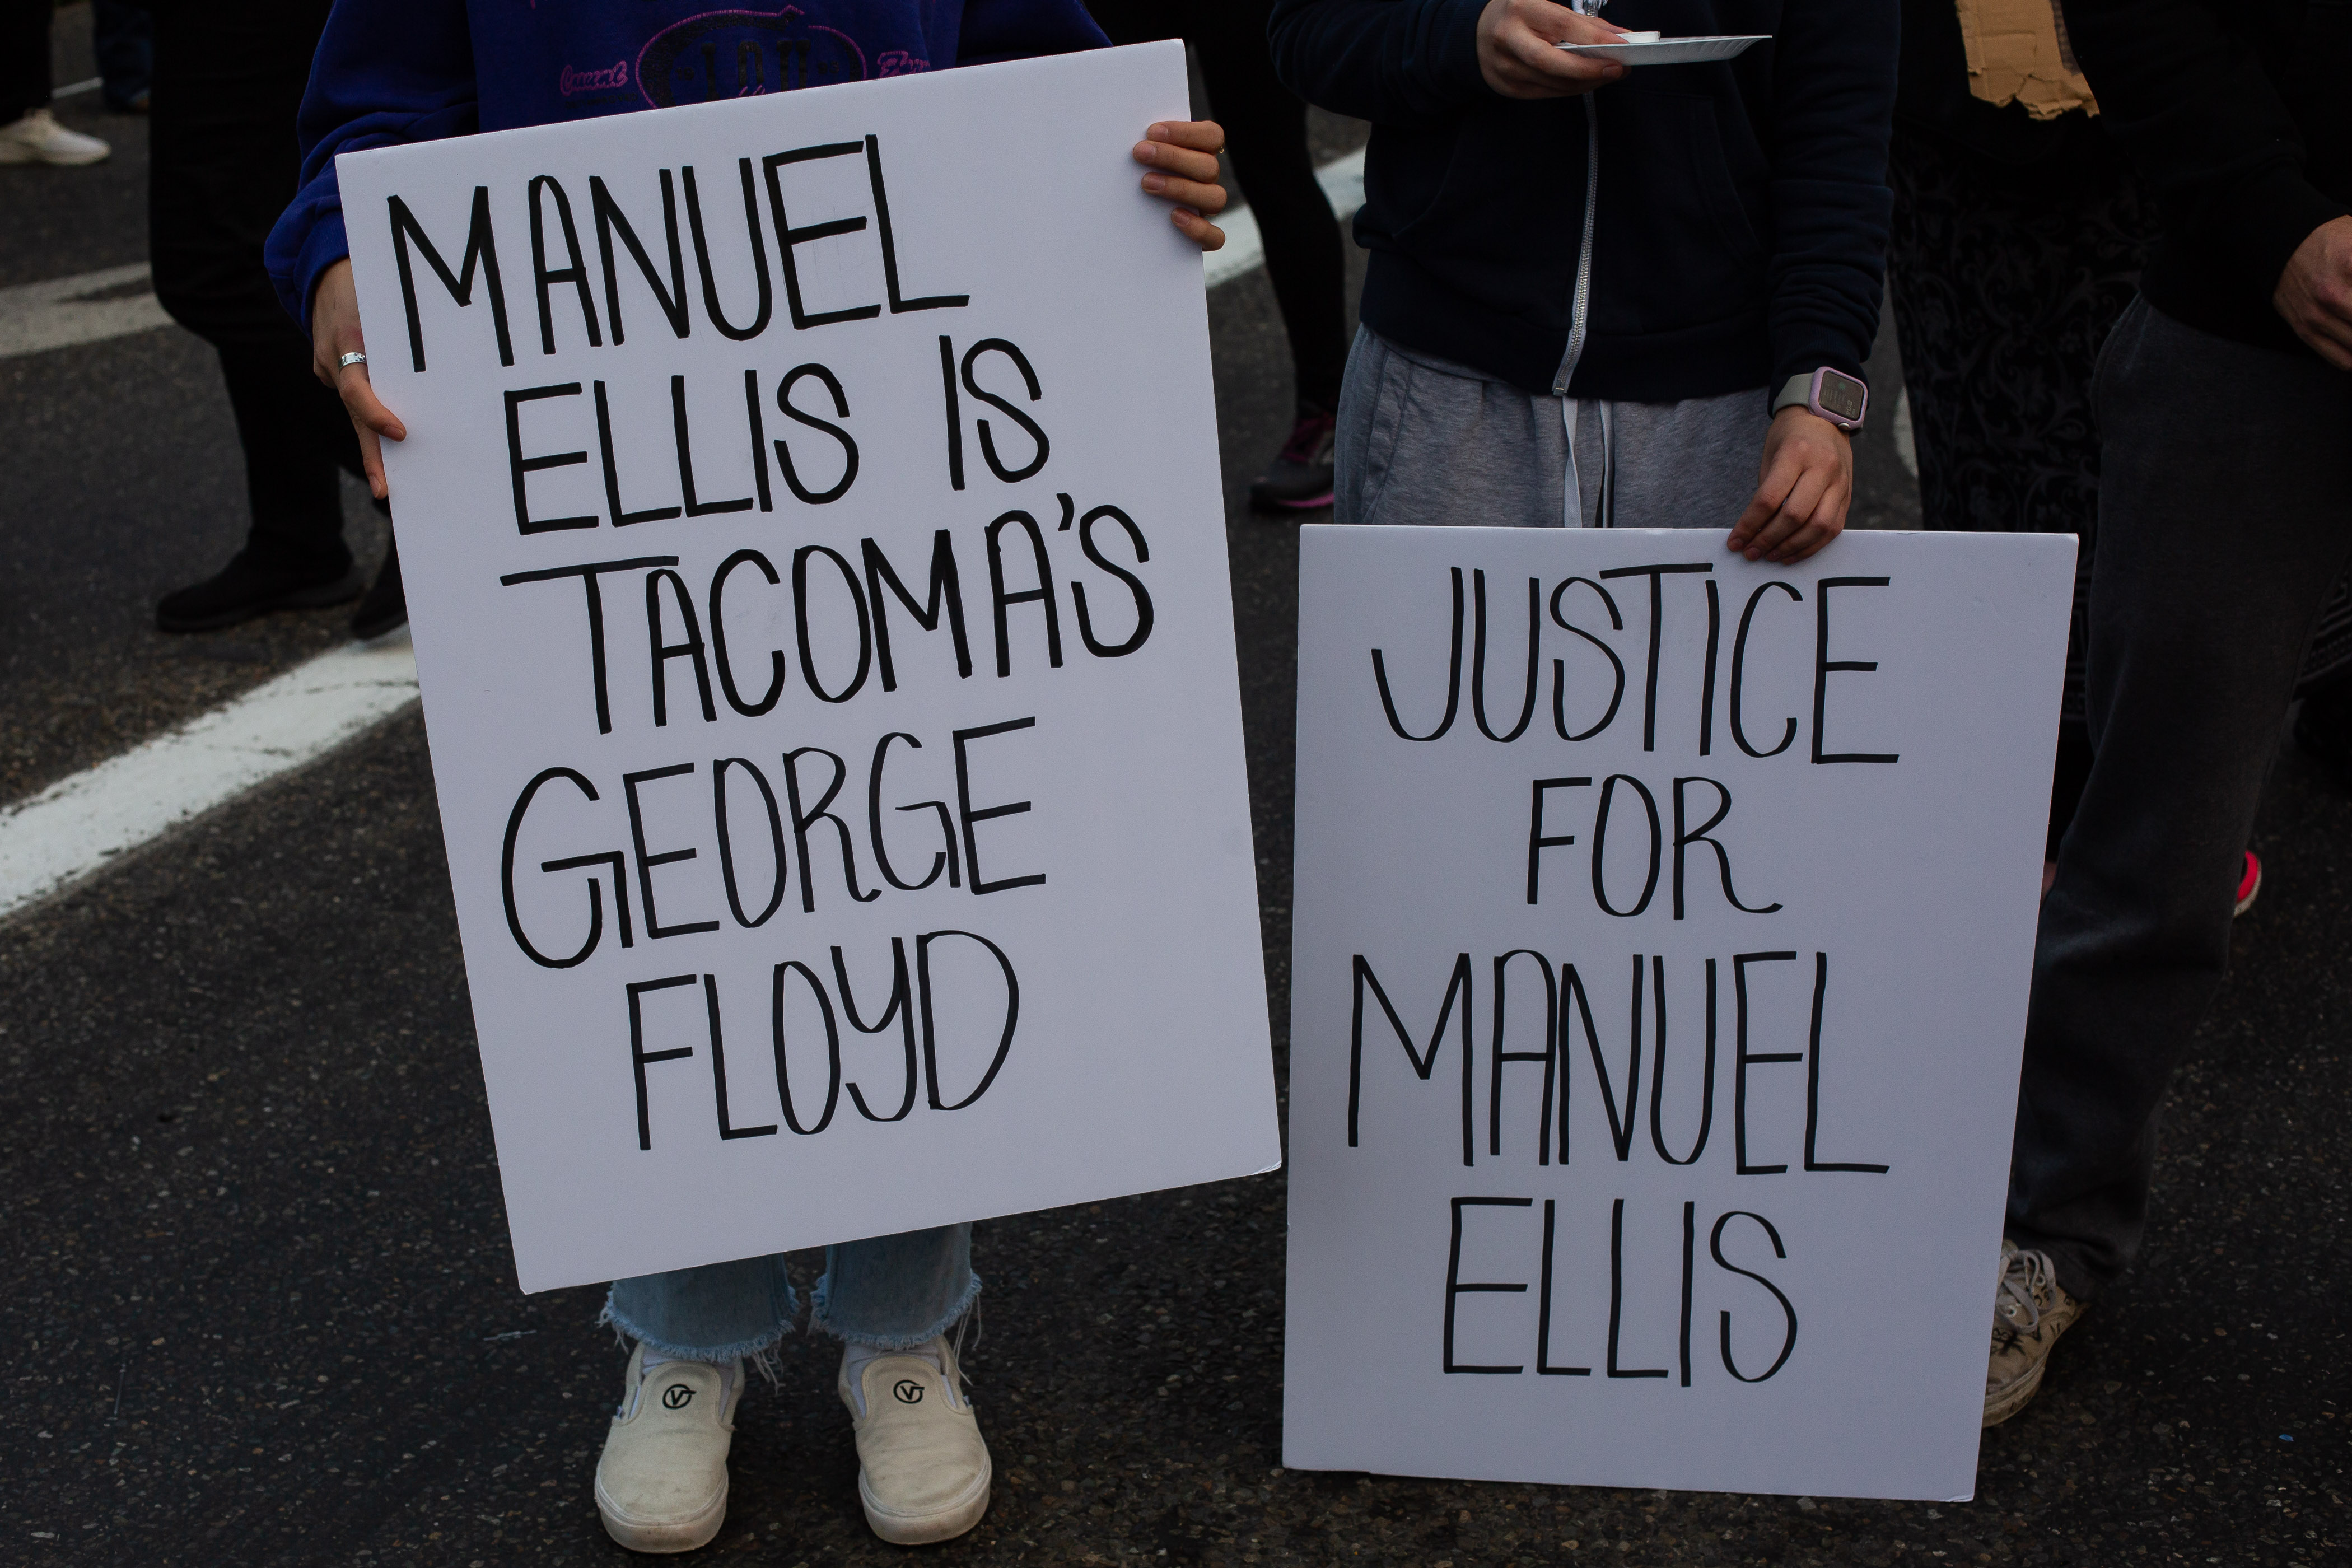 TACOMA, WA - JUNE 03: People hold signs during a vigil for Manuel Ellis, a black man whose March death while in Tacoma Police custody was recently found to be a homicide, according to the Pierce County Medical Examiners Office, near the site of his death on June 3, 2020 in Tacoma, Washington. Protests and other events sparked by the death of George Floyd have continued in the Tacoma area after the Medical Examiner found that the cause of death in the Manuel Ellis case was caused by respiratory arrest due to hypoxia due to physical restraint. (Photo by David Ryder/Getty Images)